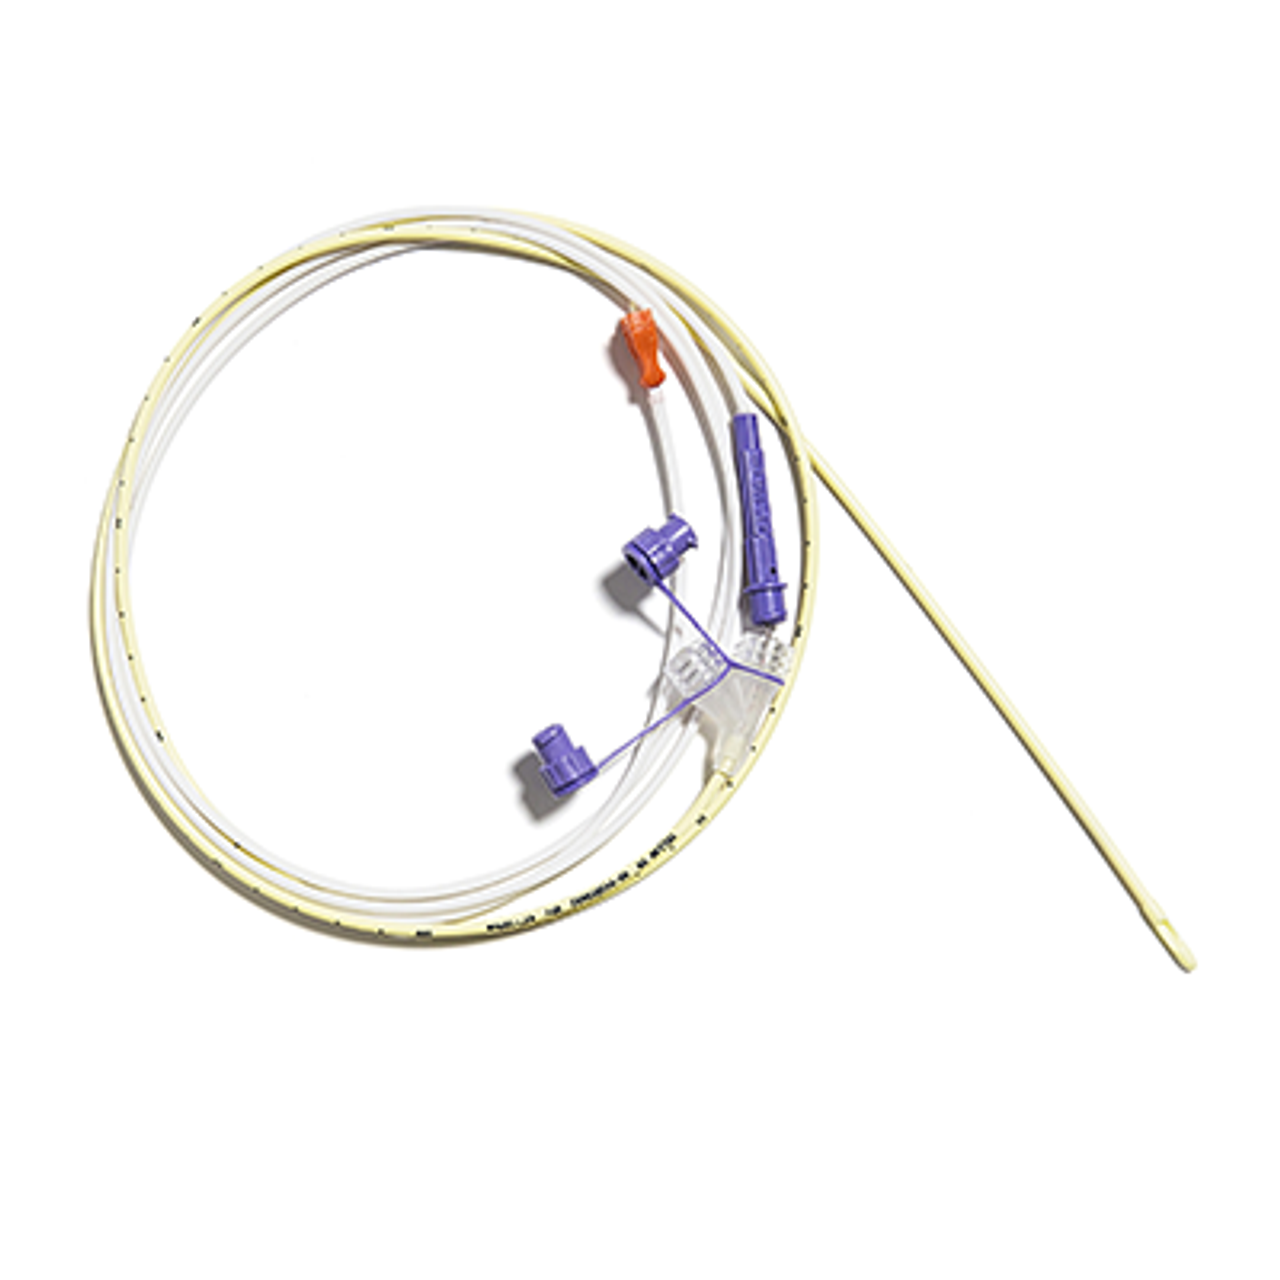 Cortrak2 Nasointestinal Feeding Tube With Electromagnetic Transmitting Stylet With ENFit Connector